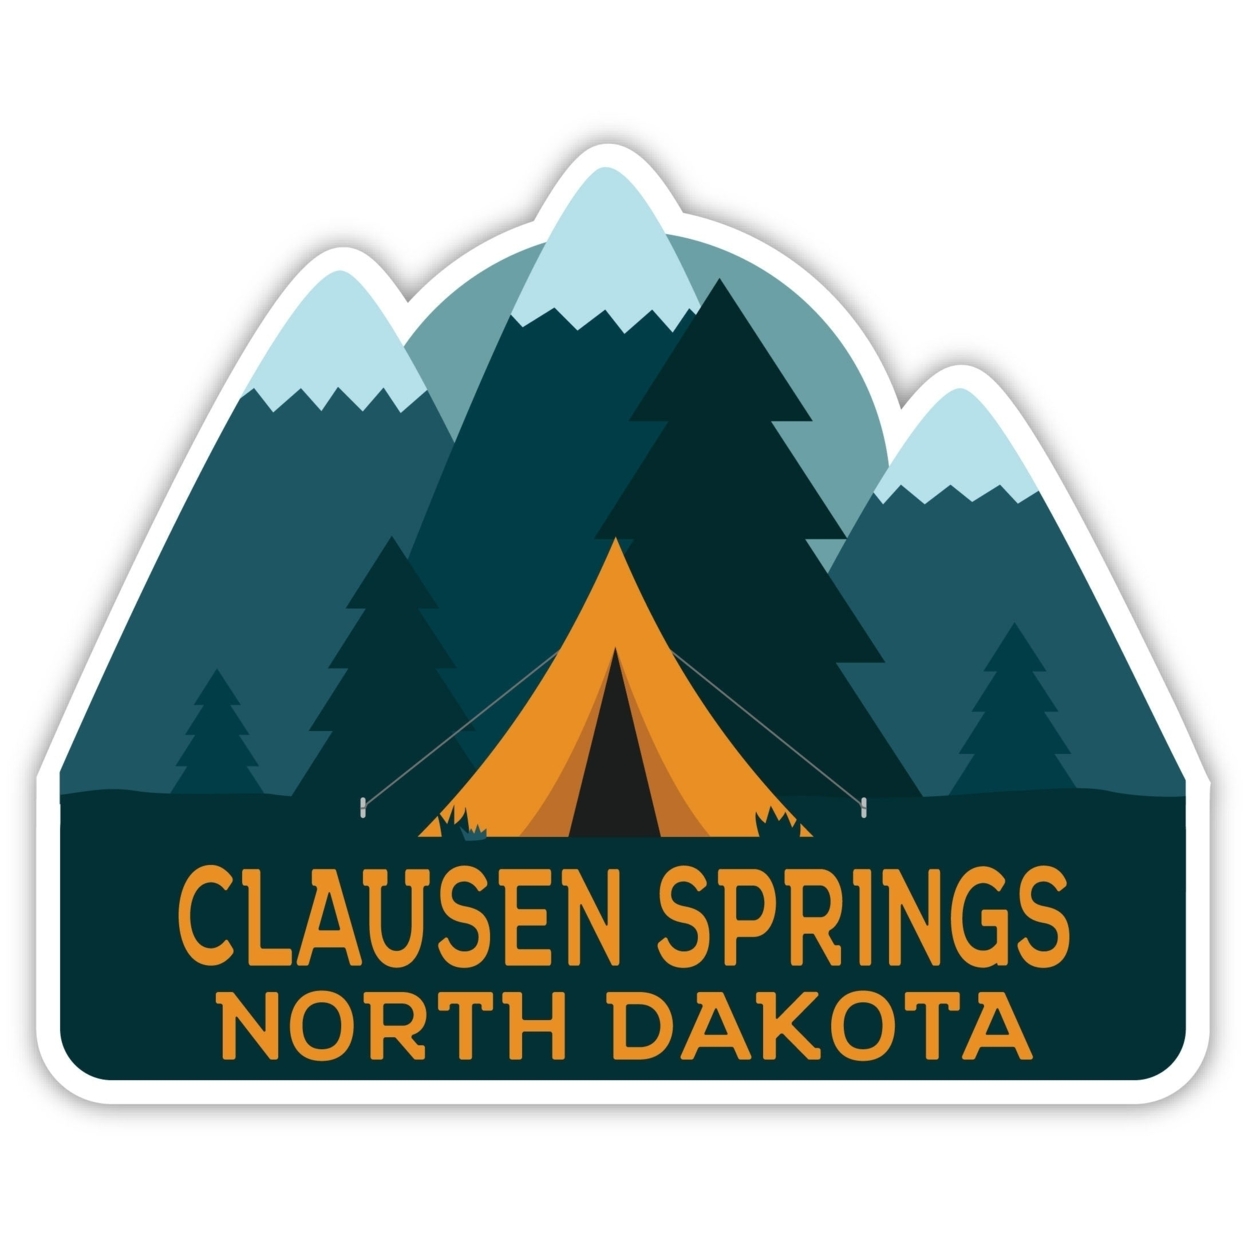 Clausen Springs North Dakota Souvenir Decorative Stickers (Choose Theme And Size) - 4-Pack, 12-Inch, Tent